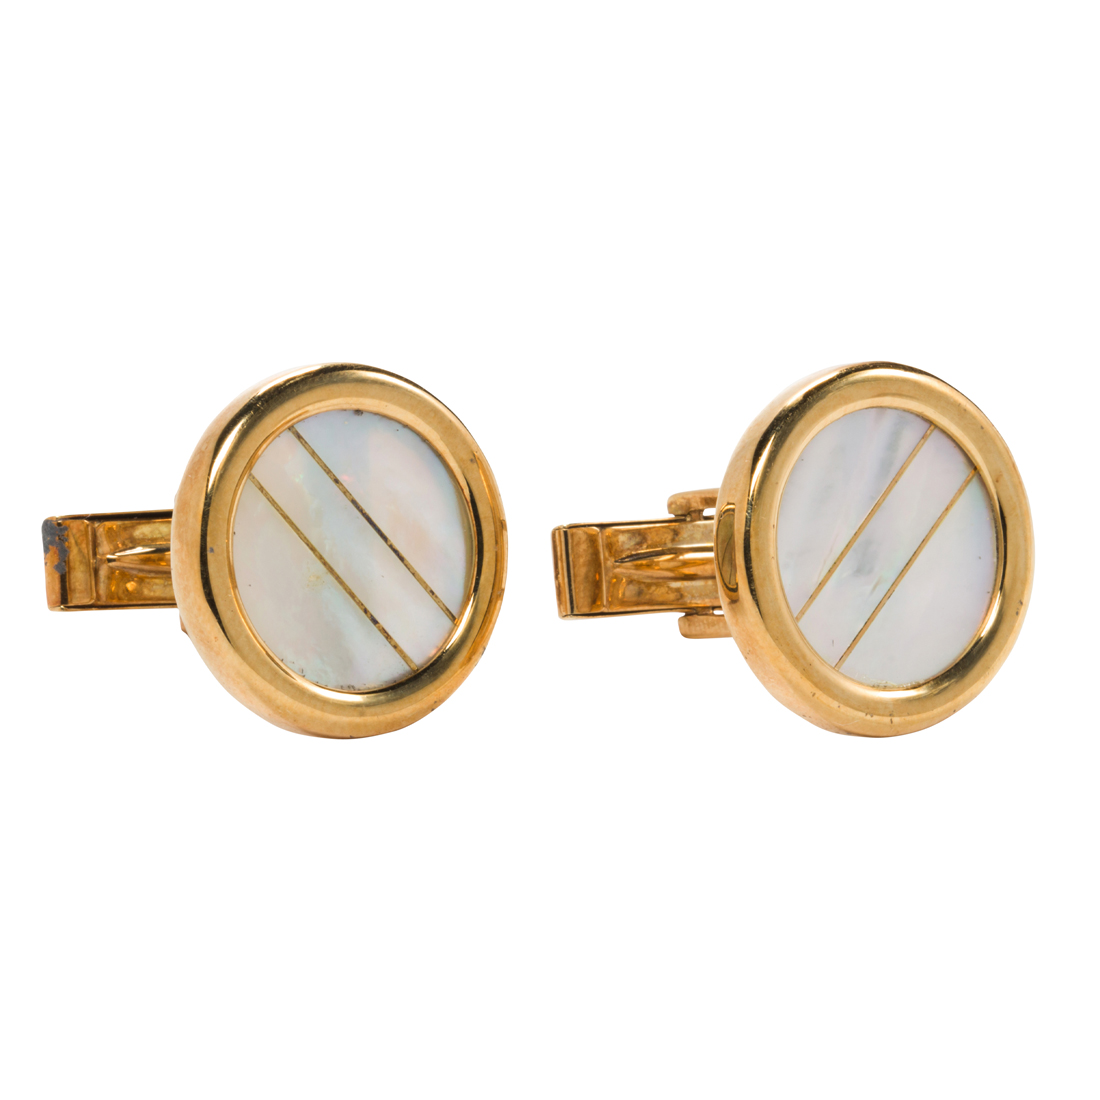 A PAIR OF MOTHER-OF-PEARL AND 14K